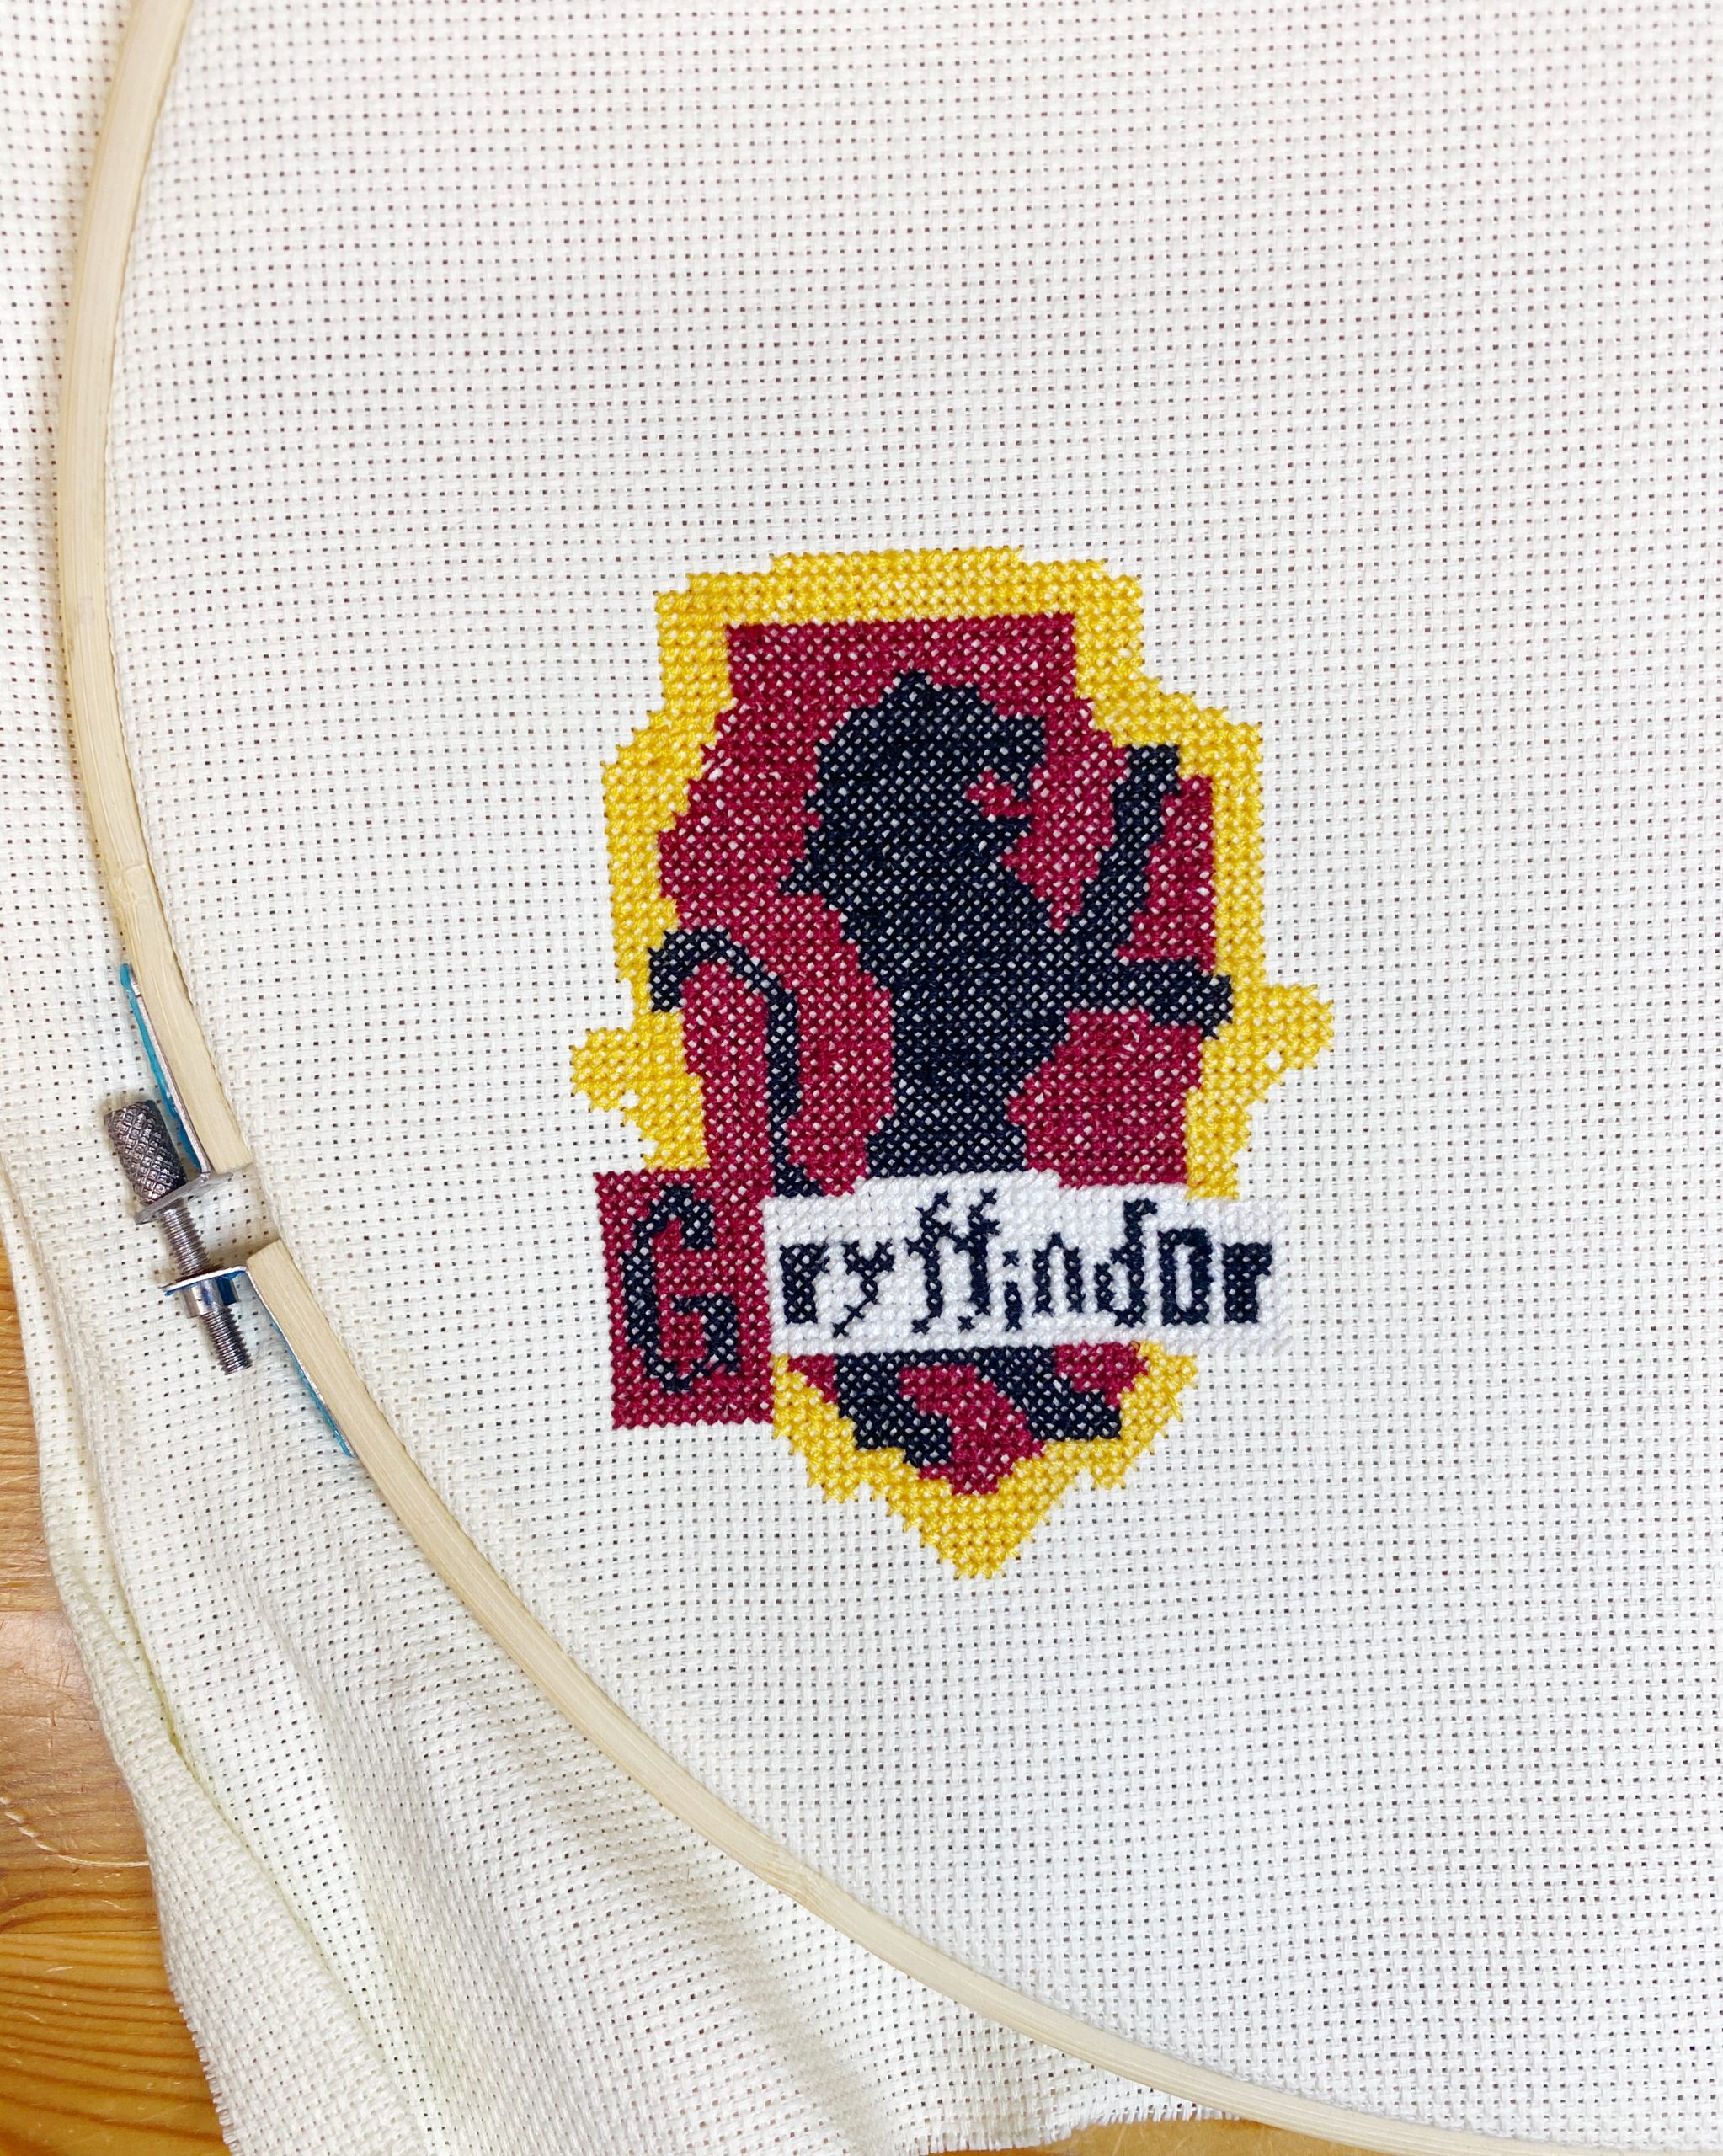 The stitching is all done!